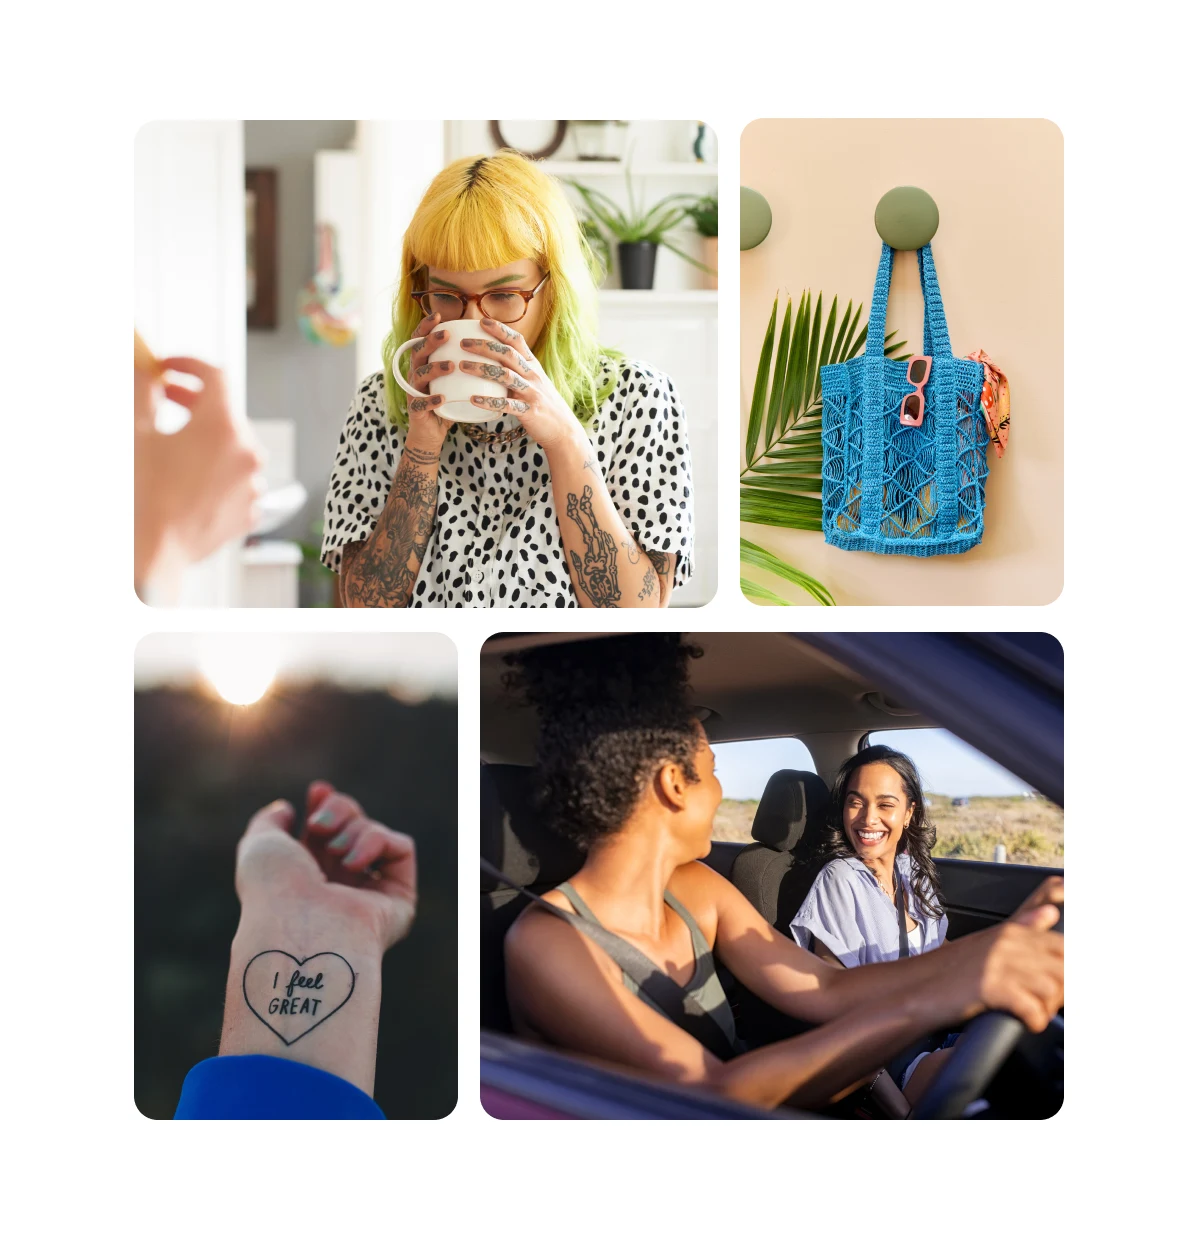  Pin grid featuring woman with bright yellow and green hair, blue knit bag with sunglasses inside, wrist with a tattoo reading "i feel great", two women in a car laughing in the sun.